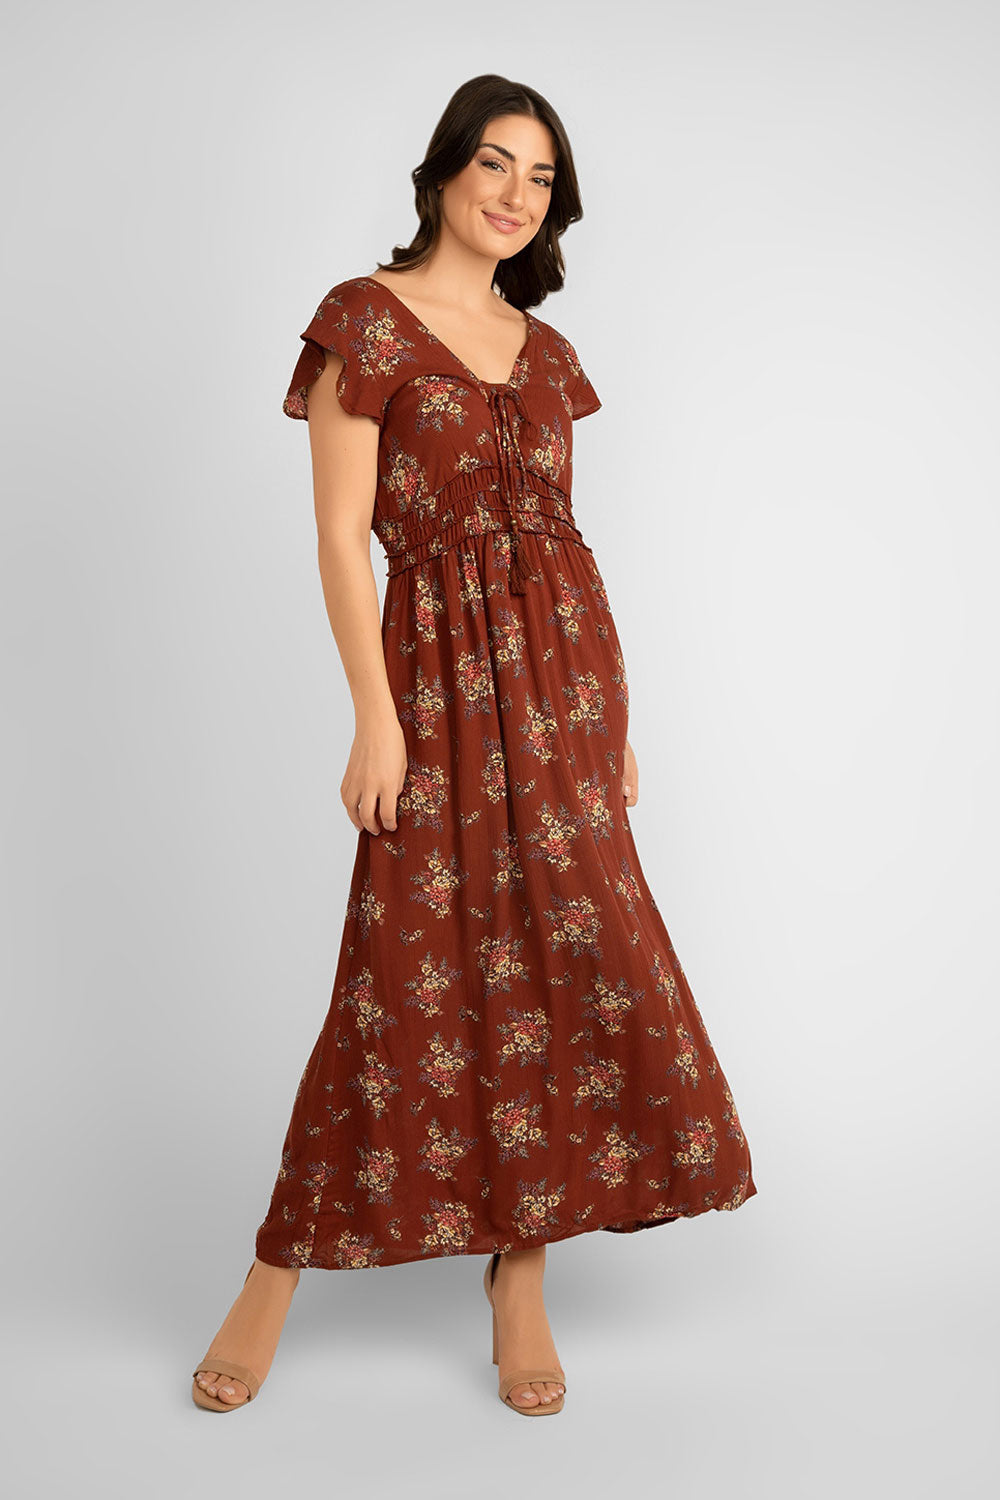 NOSTALGIA - Floral Printed Maxi Dress - Women's Clothing & Accessories 